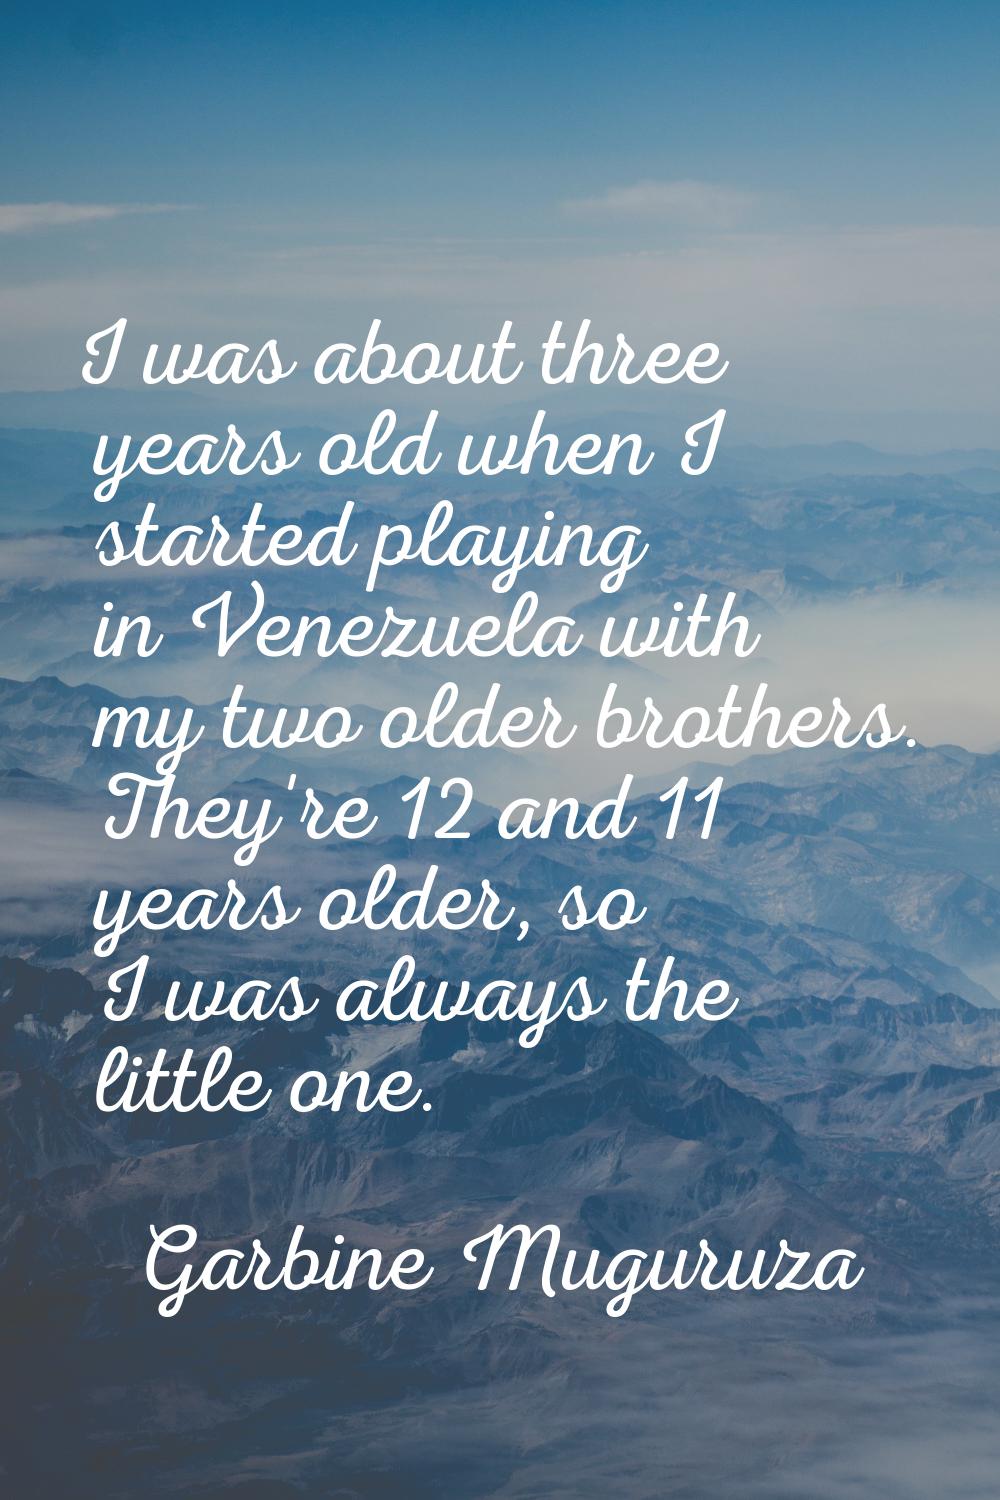 I was about three years old when I started playing in Venezuela with my two older brothers. They're